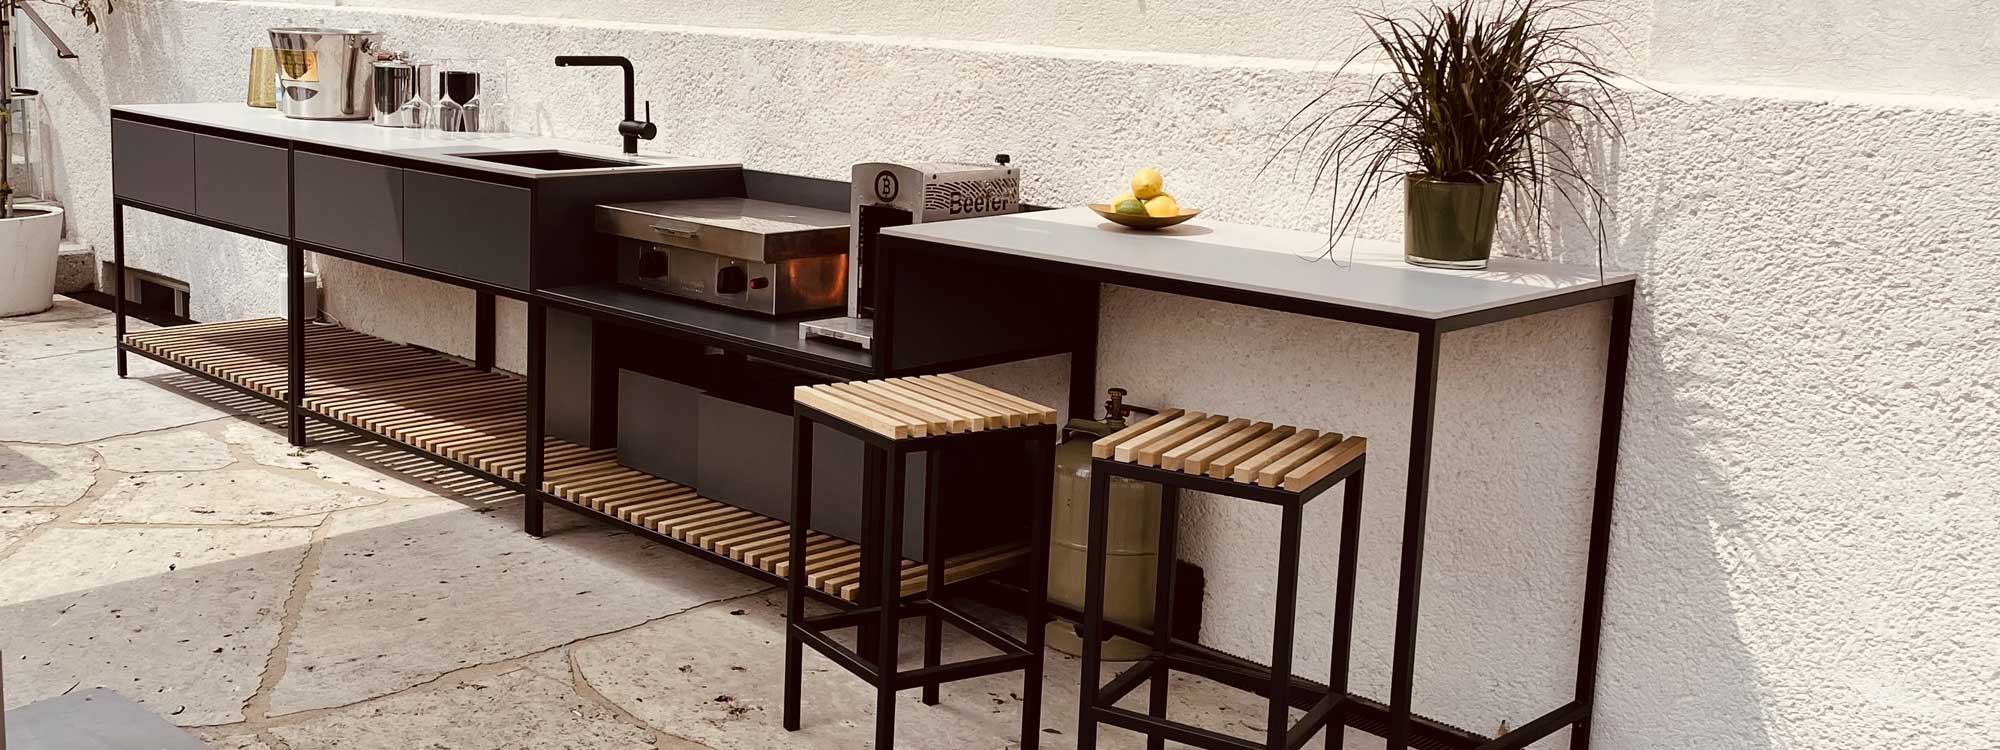 Image of Conmoto Ticino Frame modern garden kitchen with anthracite stainless steel frame and light grey ceramic work tops, shown against whitewashed building